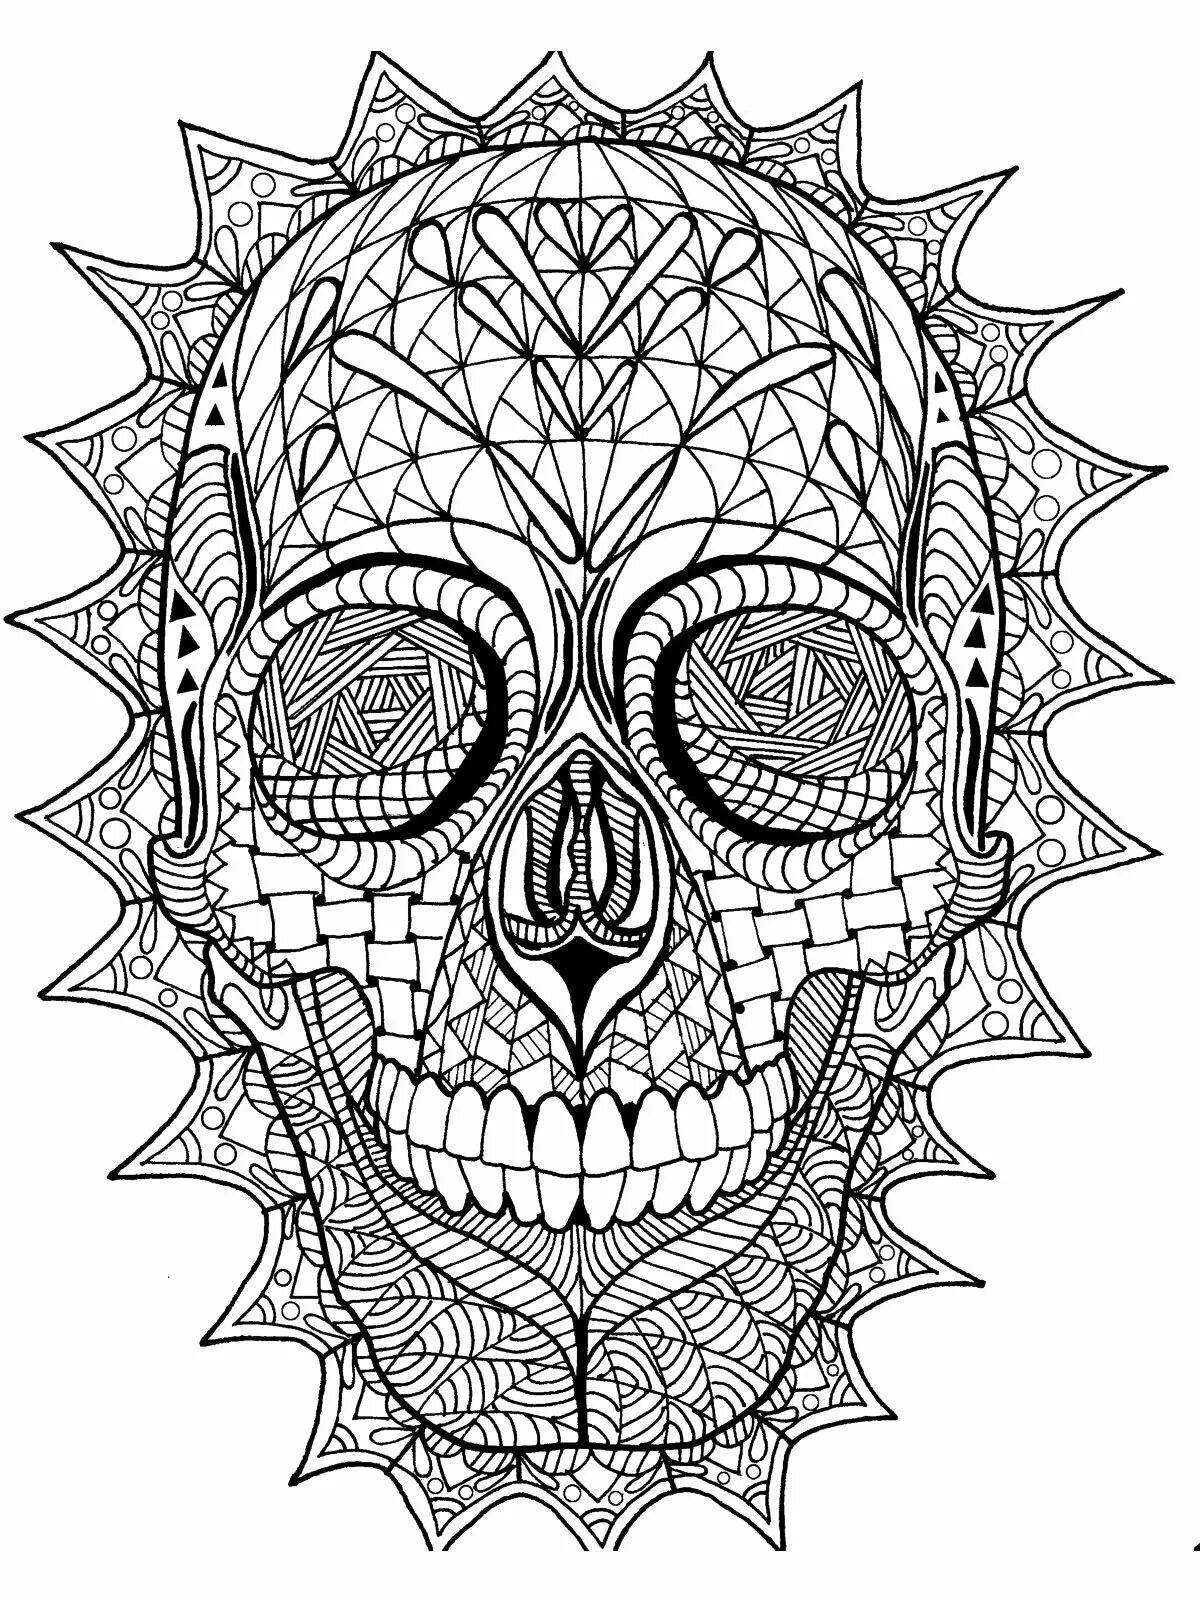 Gorgeous anti-stress skull coloring book